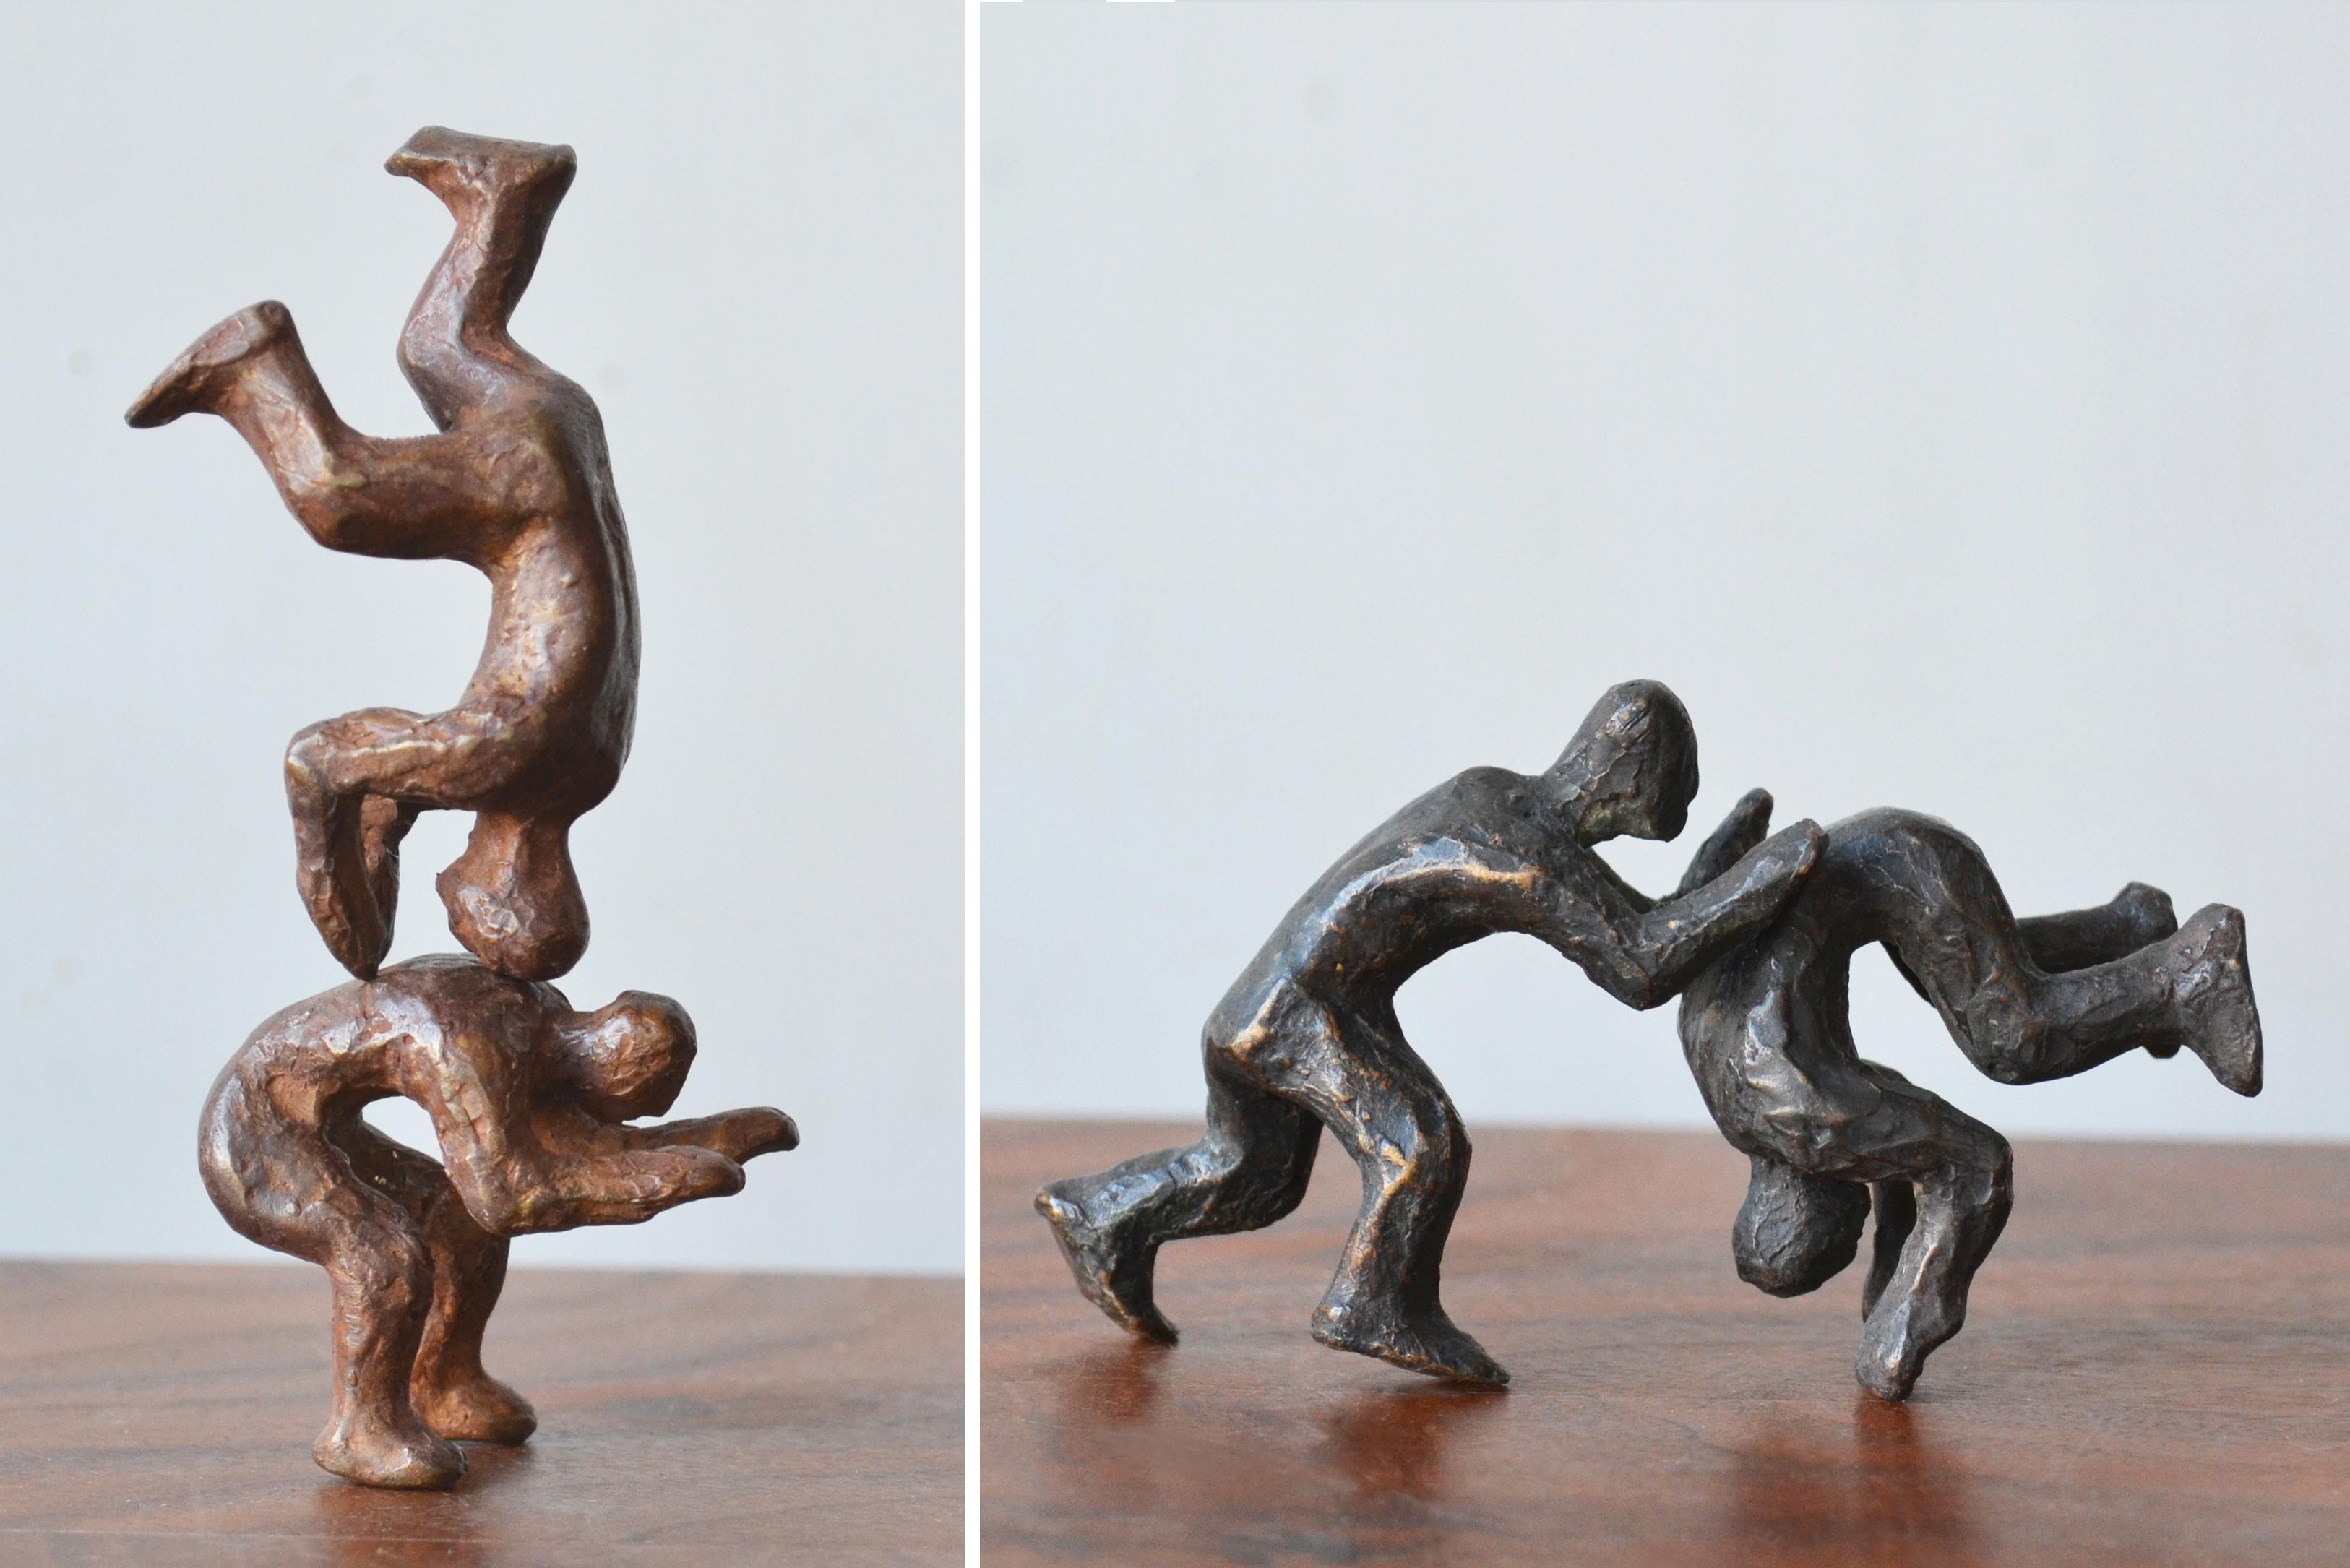 Why Fight When You Can Play? 2 Pairs of interactive miniature bronze figures  - Contemporary Sculpture by Noa Bornstein